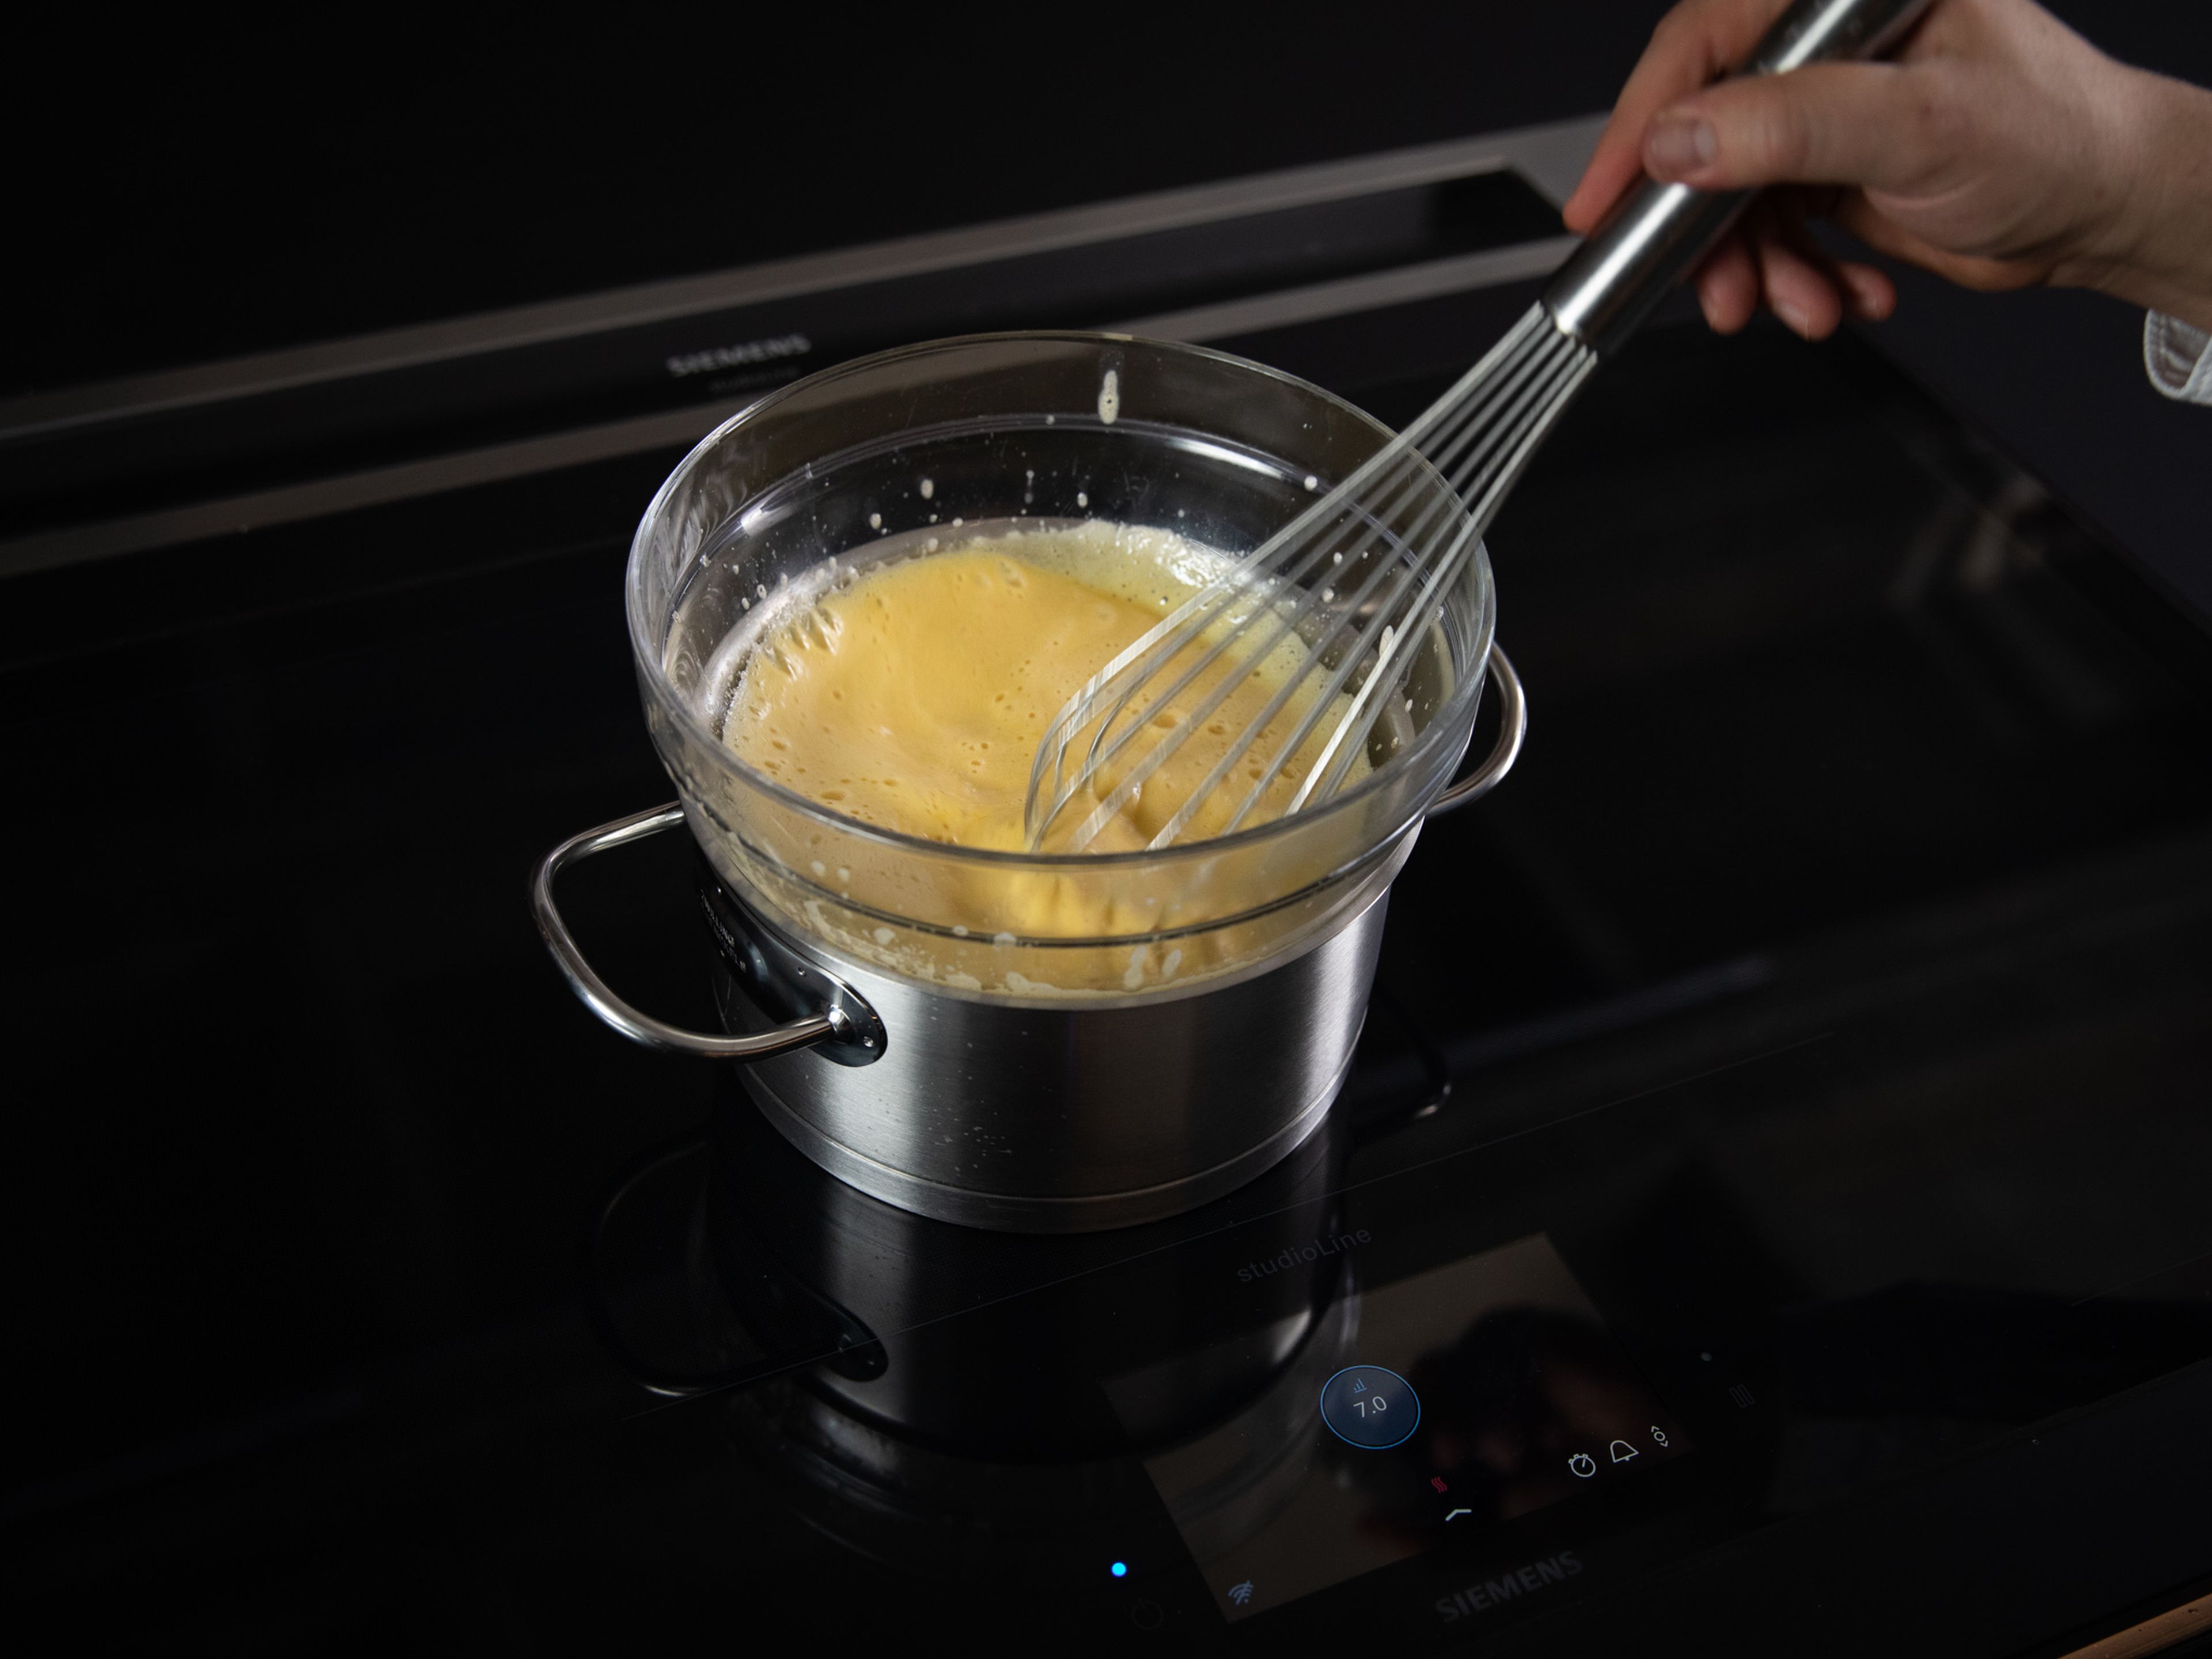 Add egg yolks to a bowl set over a pot of simmering water. Whisk in remaining sugar and Marsala wine. Heat over simmering water, whisking constantly until the mixture is creamy and light.